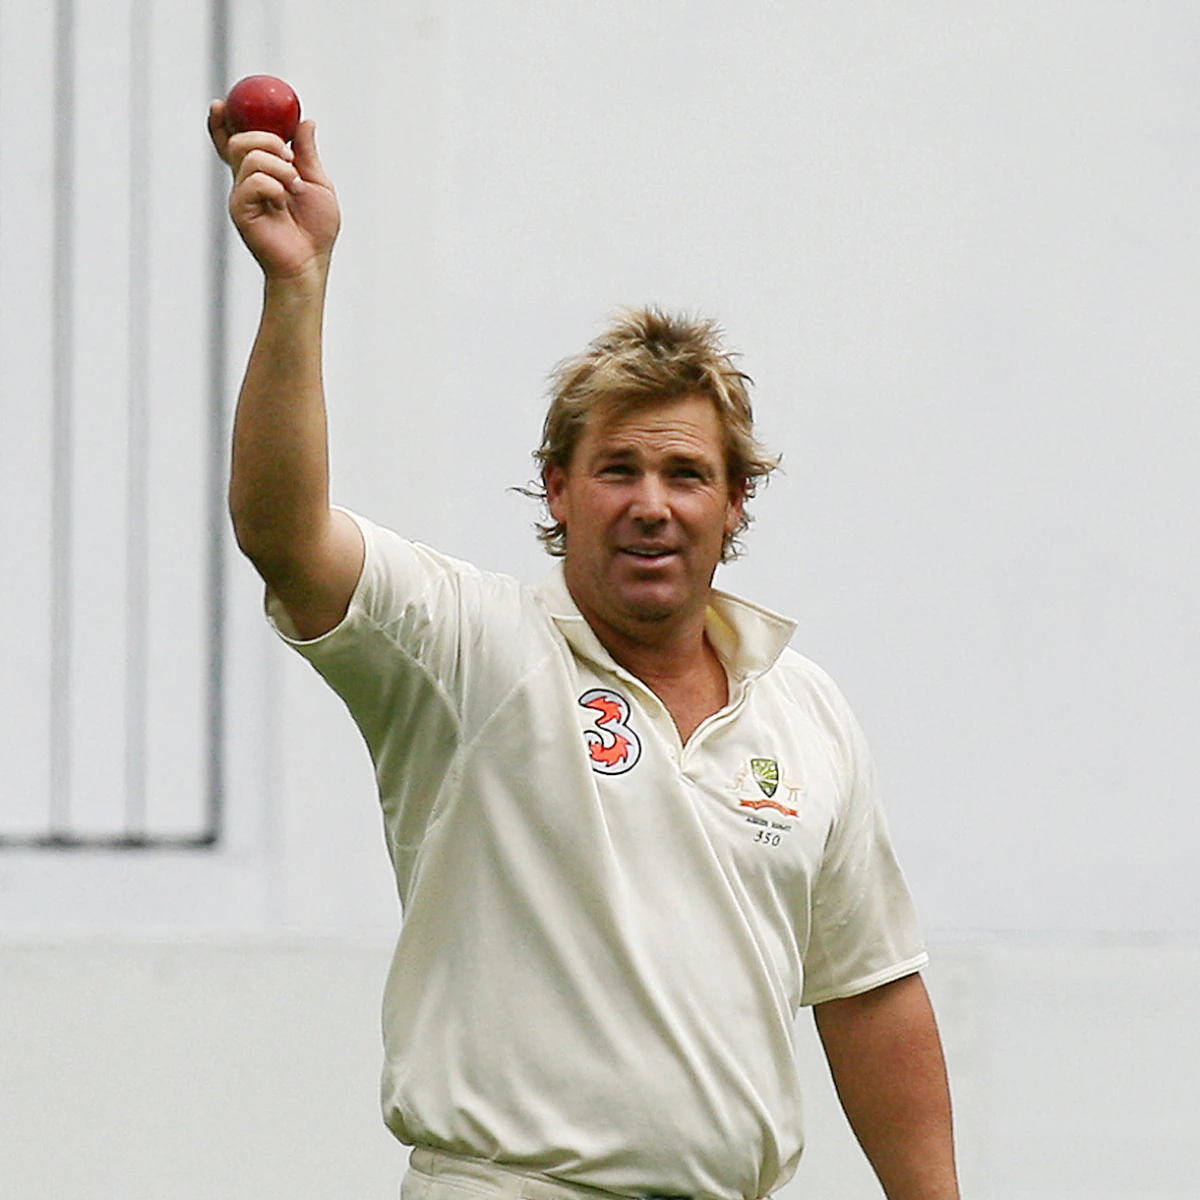 Shane Warne and his foundation